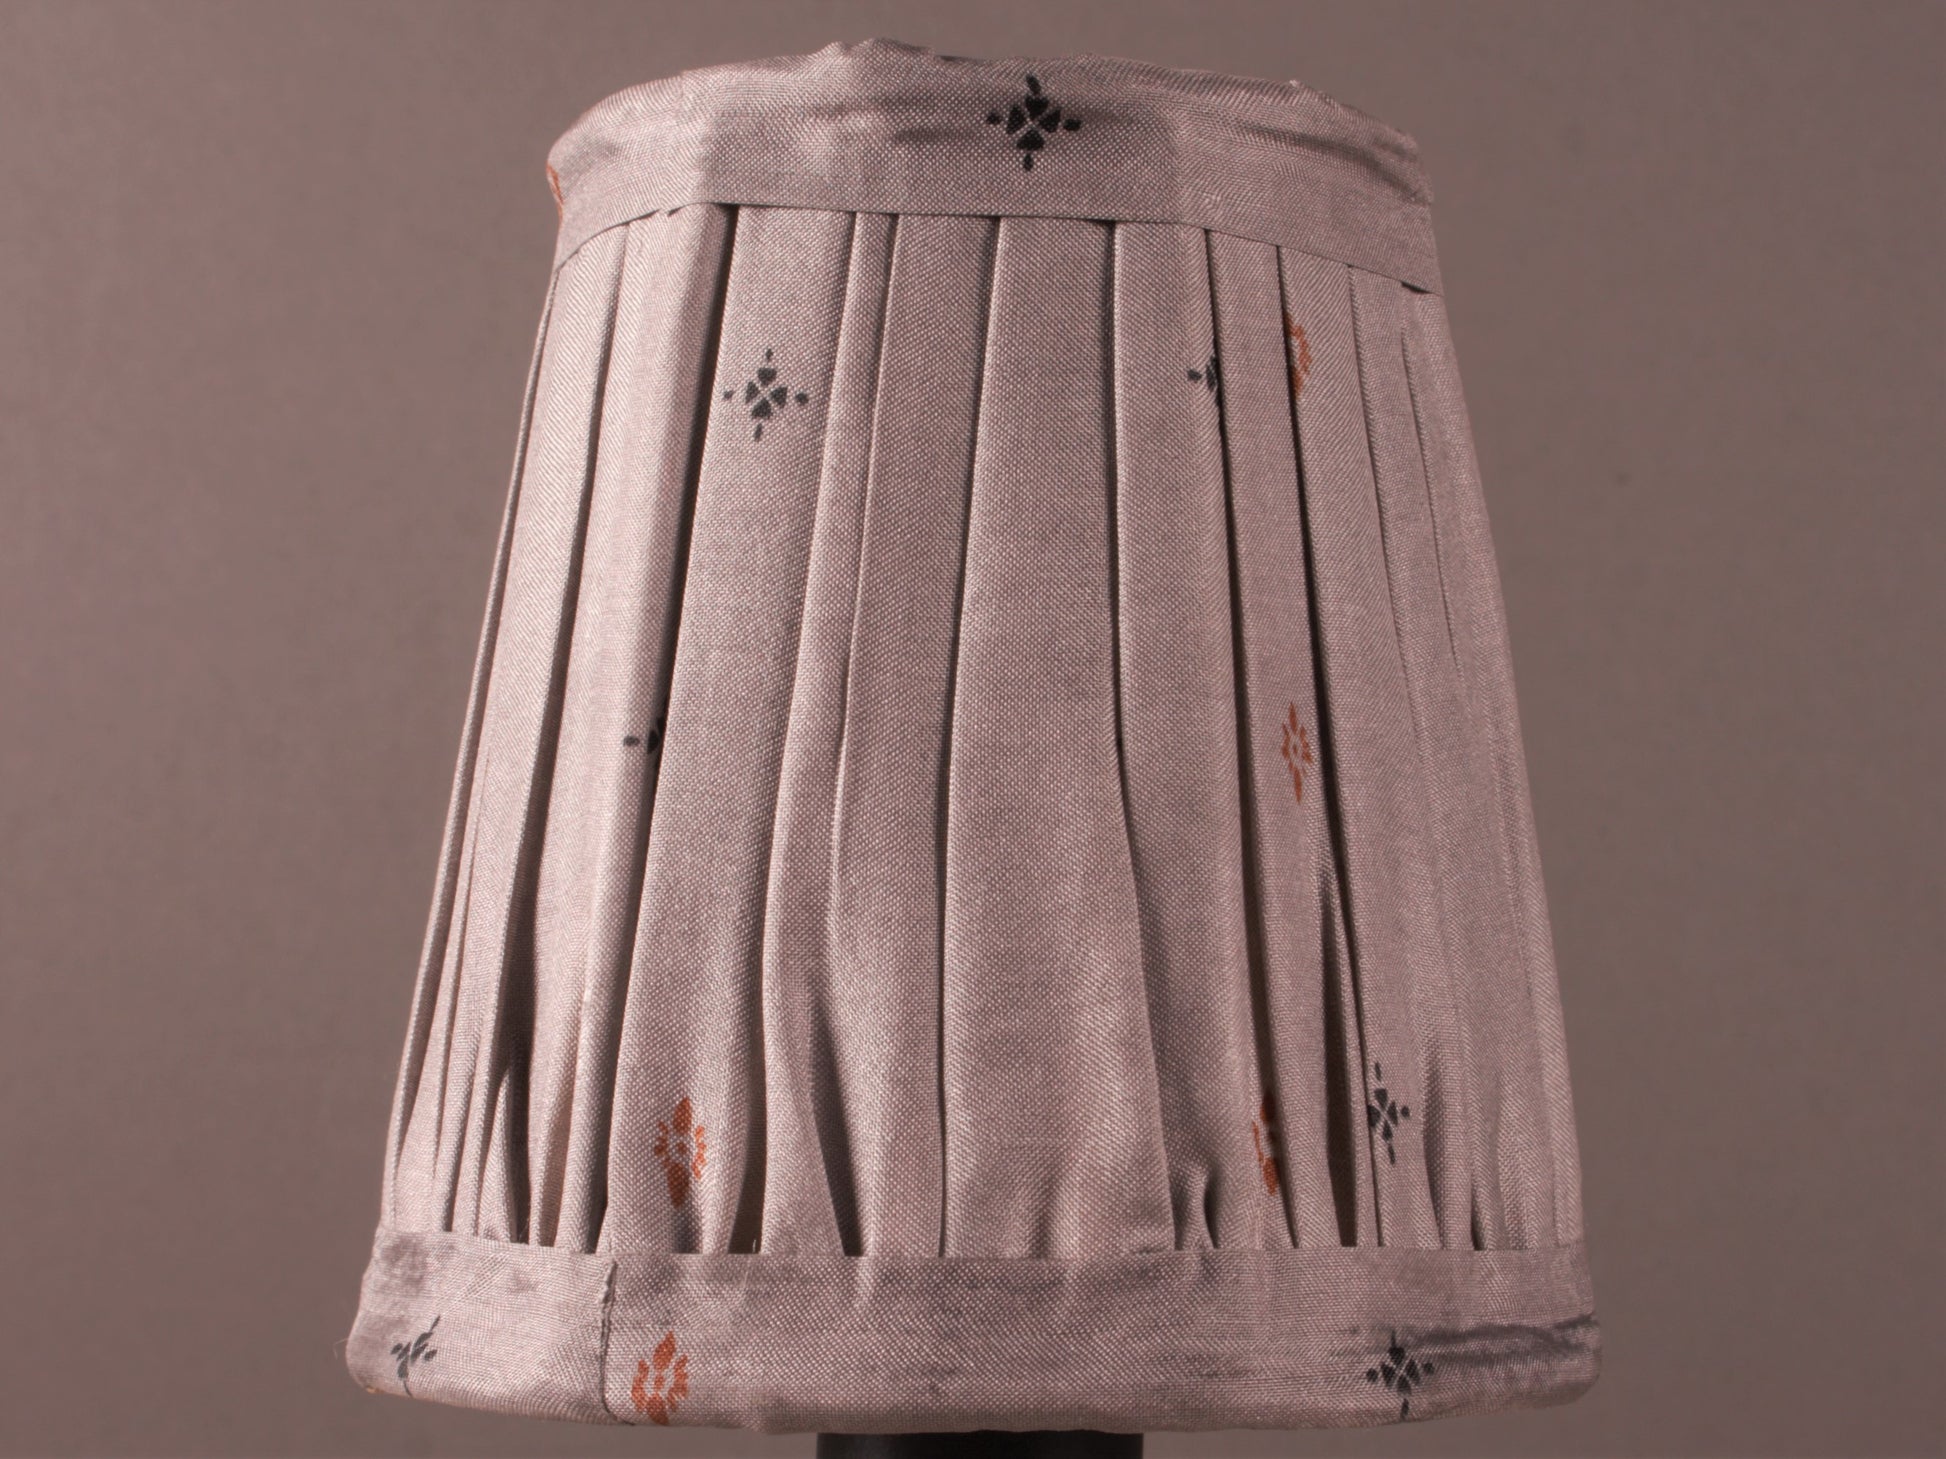 Dove Grey Silk Lampshade shown on a grey background